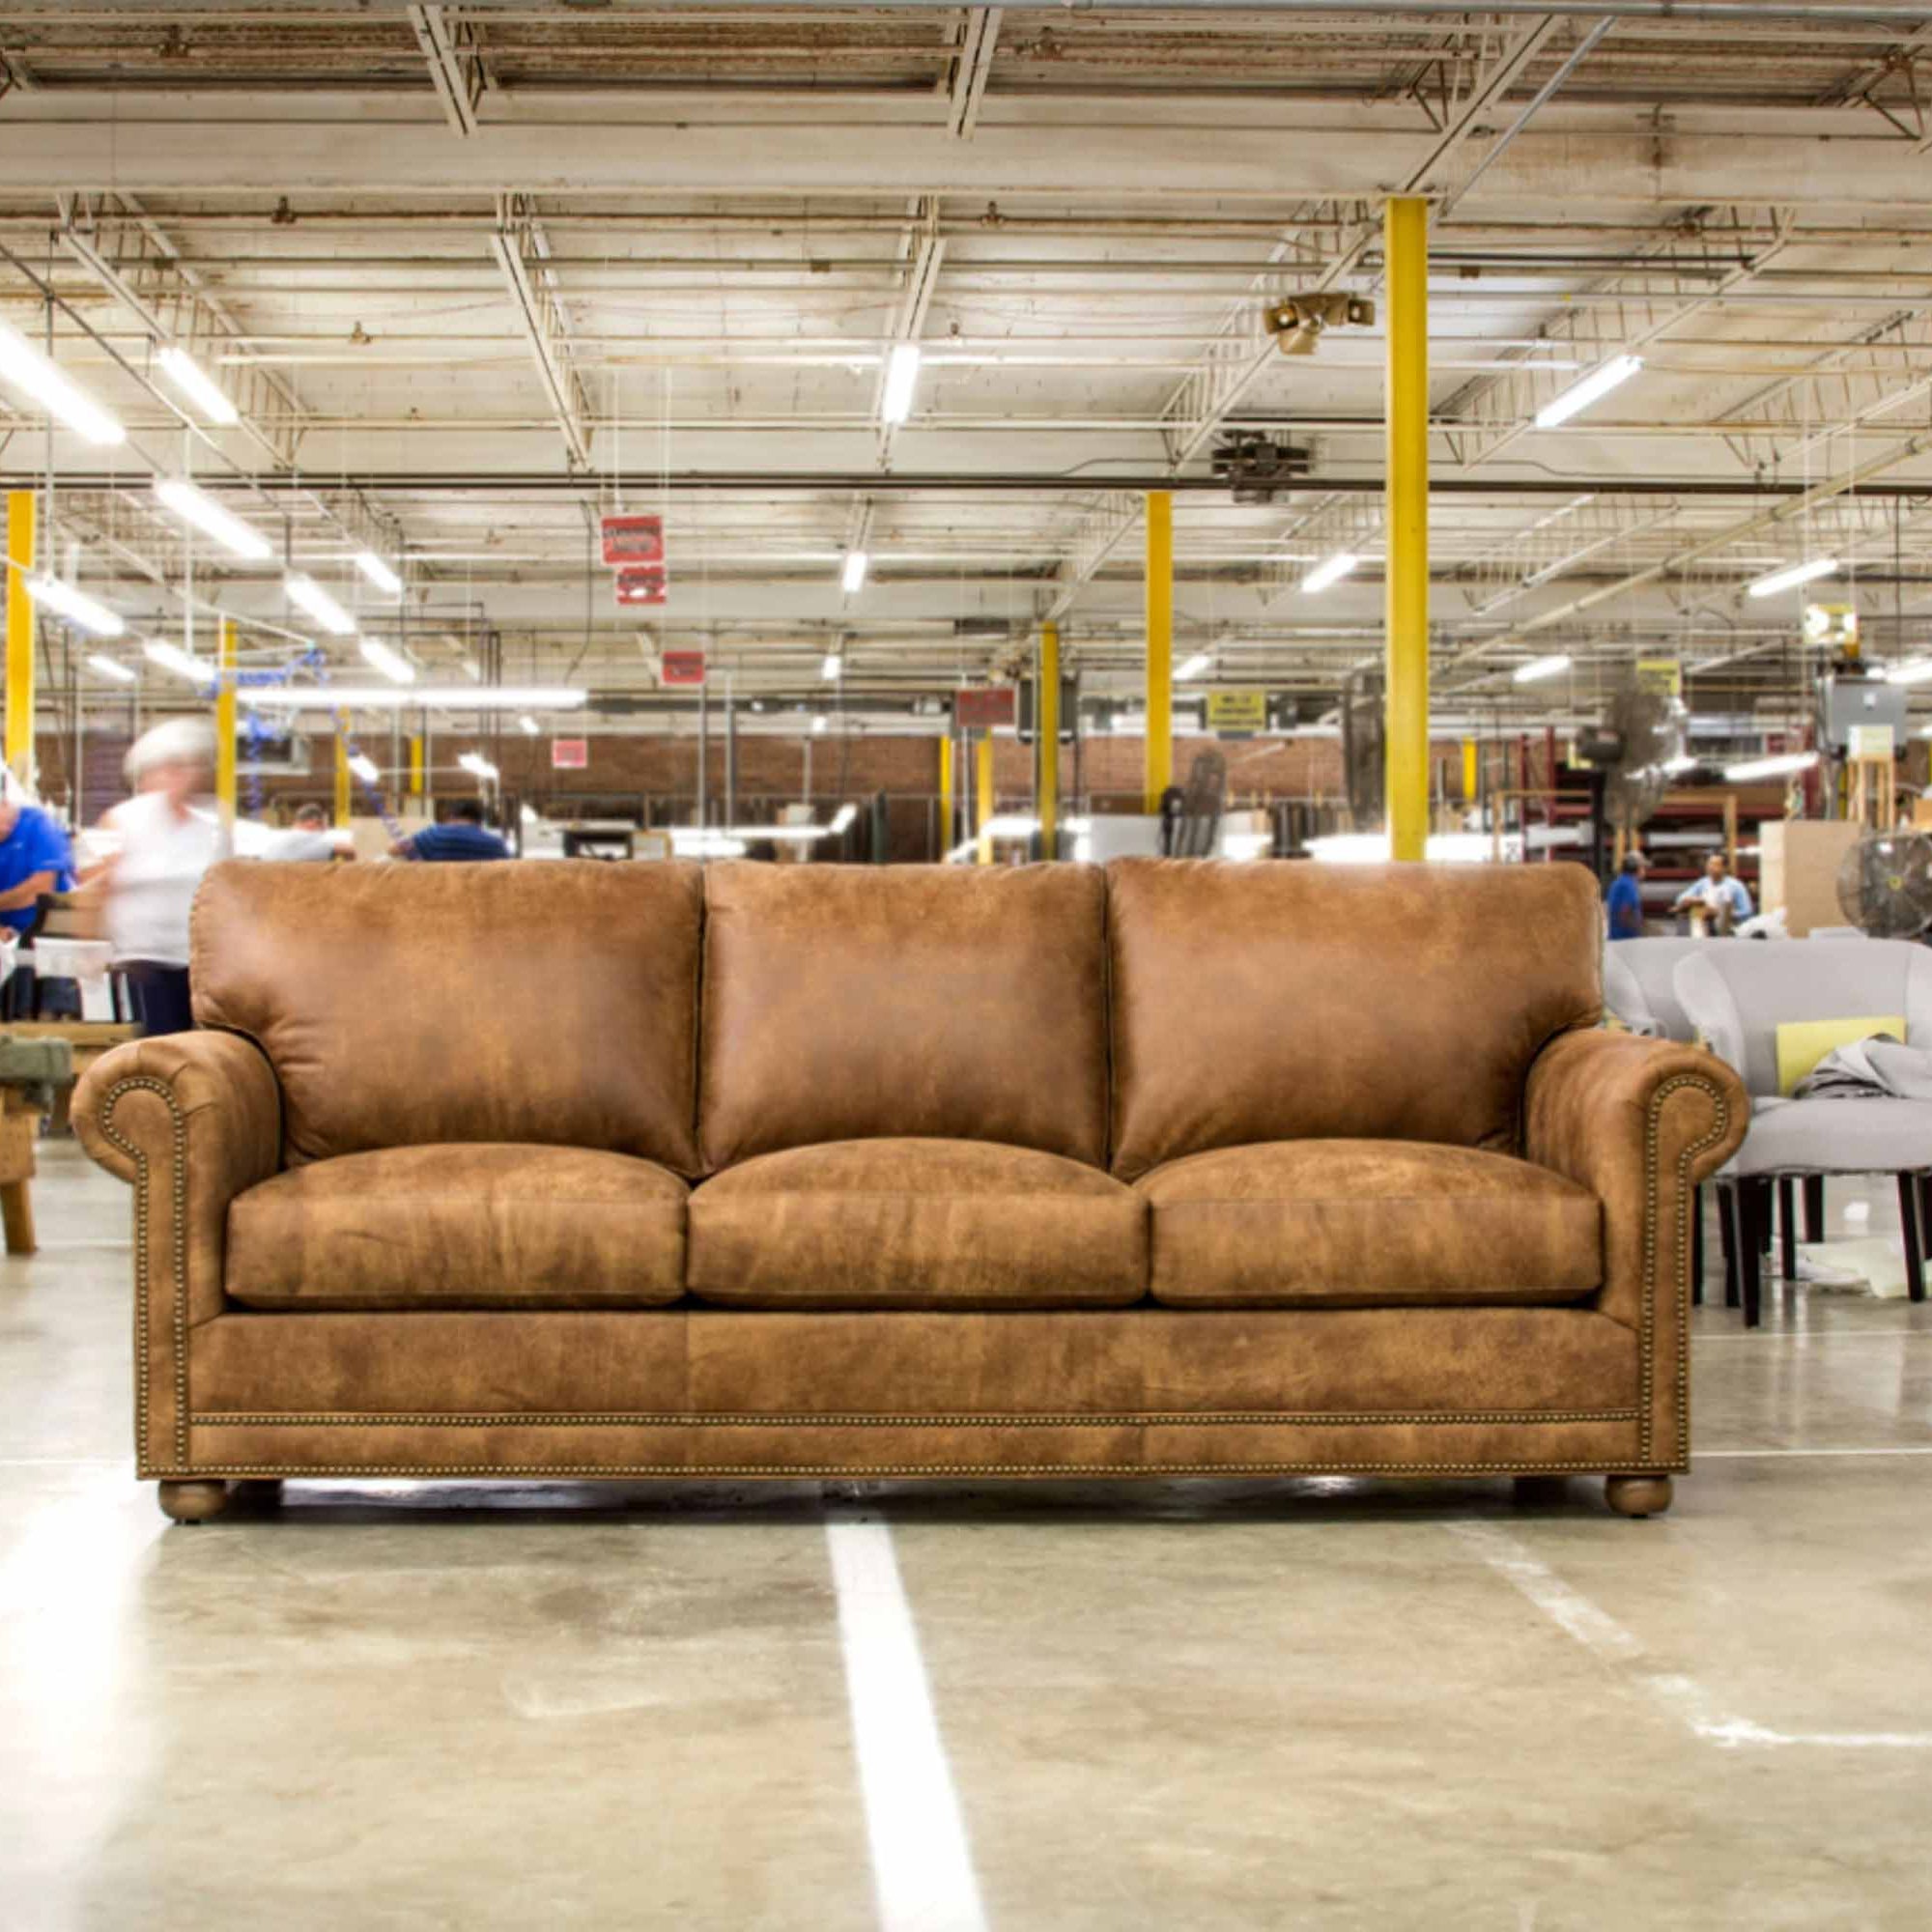 The Definitive Guide To Buying Leather Furniture